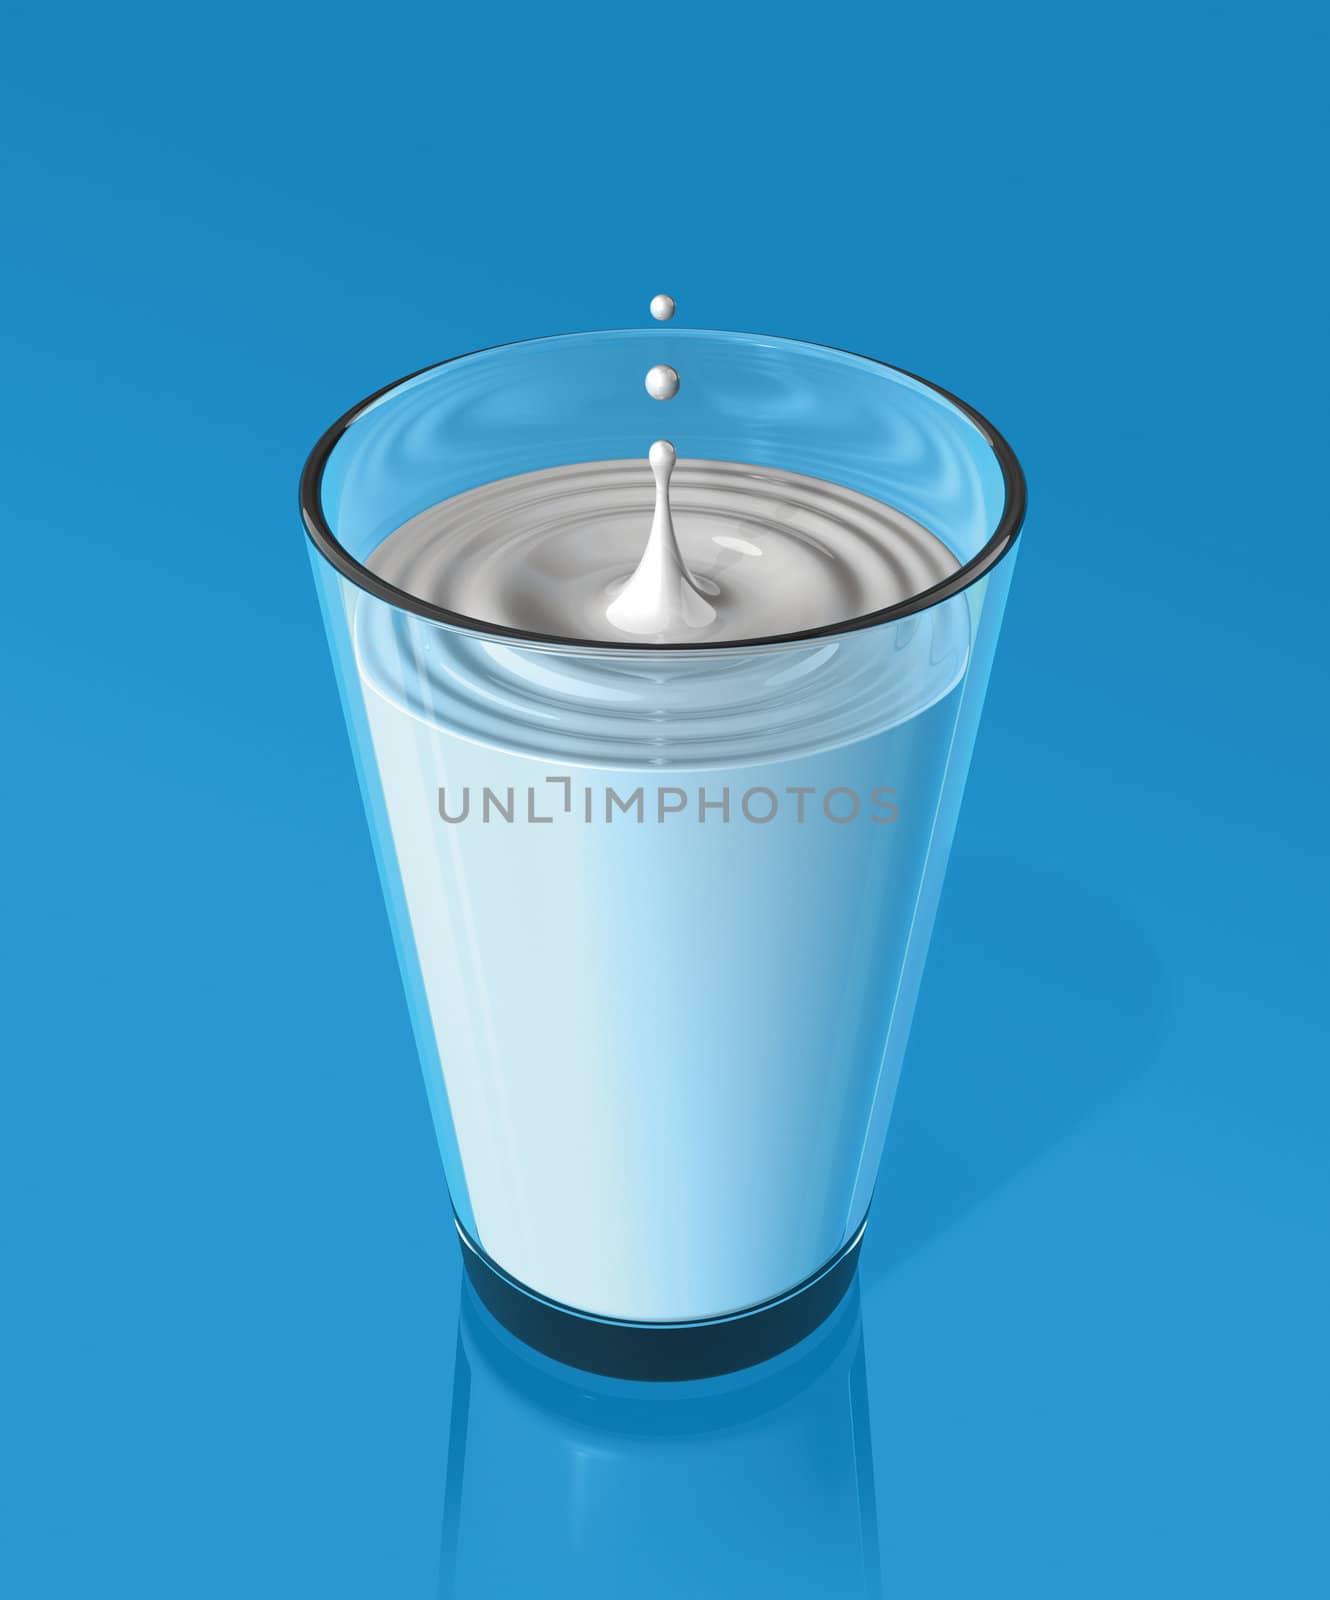 drop of milk splashing and making ripple in a glass. 3D illustration